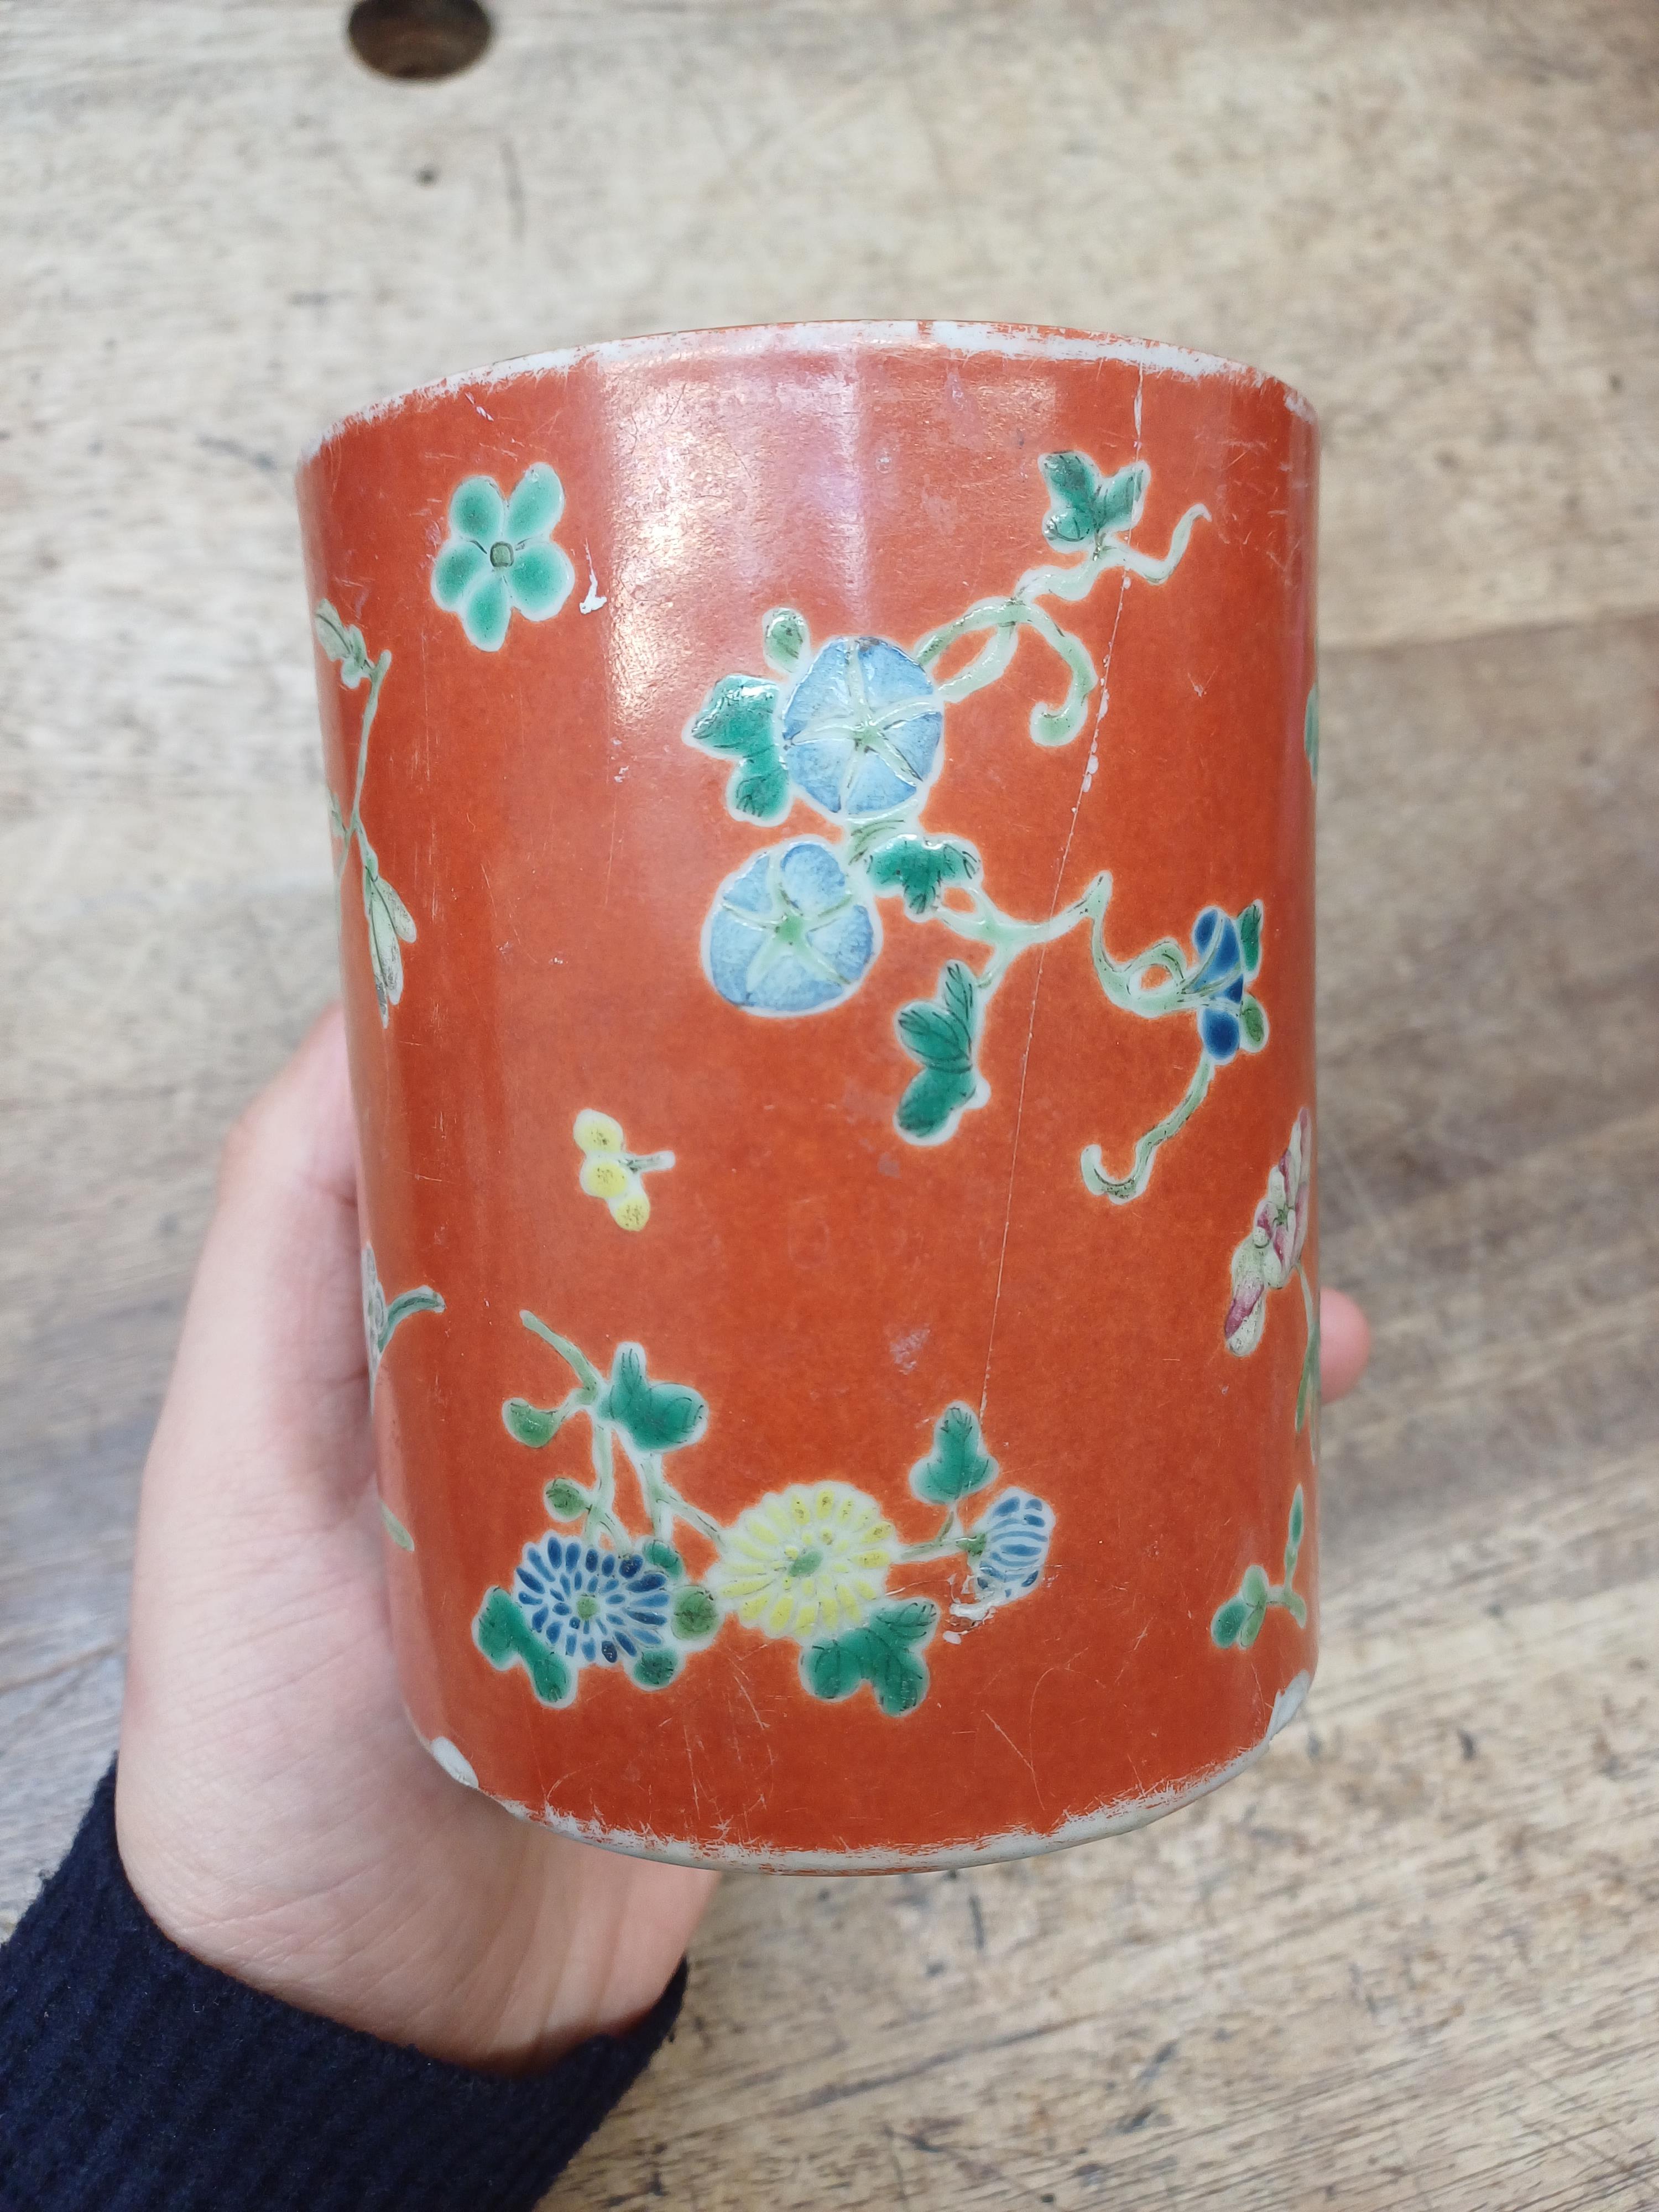 A CHINESE FAMILLE-ROSE CORAL-GROUND 'BLOSSOMS' BRUSH POT, BITONG 清十八至十九世紀 粉彩珊瑚紅地花卉紋筆筒 - Image 6 of 11